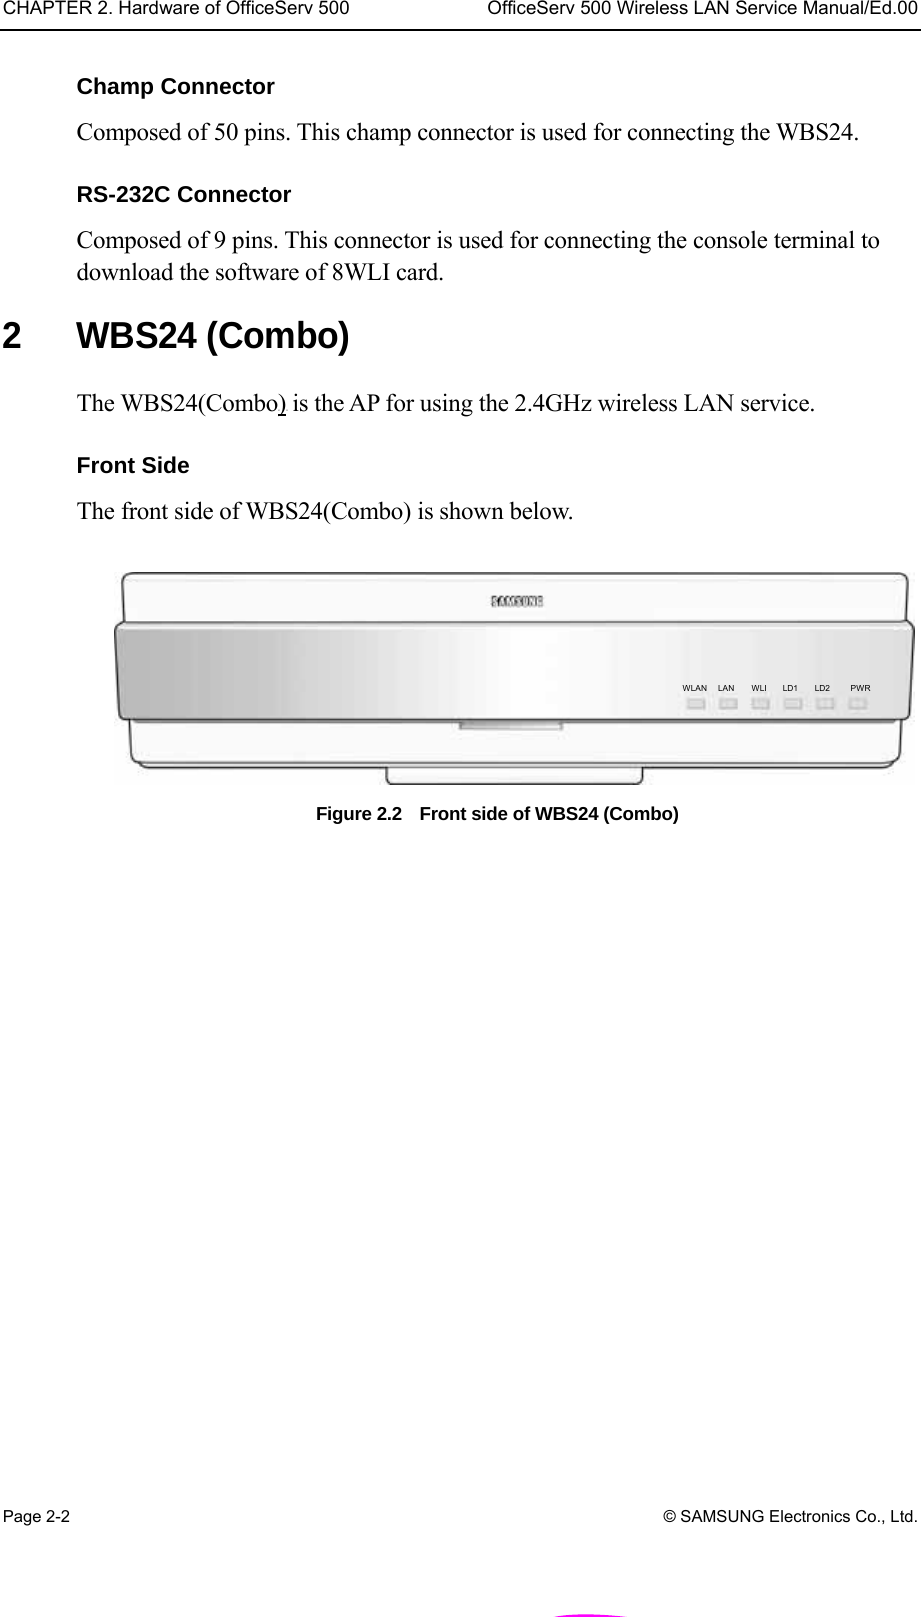 CHAPTER 2. Hardware of OfficeServ 500  OfficeServ 500 Wireless LAN Service Manual/Ed.00 Page 2-2 © SAMSUNG Electronics Co., Ltd. Champ Connector Composed of 50 pins. This champ connector is used for connecting the WBS24.  RS-232C Connector Composed of 9 pins. This connector is used for connecting the console terminal to download the software of 8WLI card.  2 WBS24 (Combo) The WBS24(ComboU)U is the AP for using the 2.4GHz wireless LAN service.    Front Side   The front side of WBS24(Combo) is shown below.  Figure 2.2    Front side of WBS24 (Combo)  WLAN LAN WLI LD1 LD2  PWR 